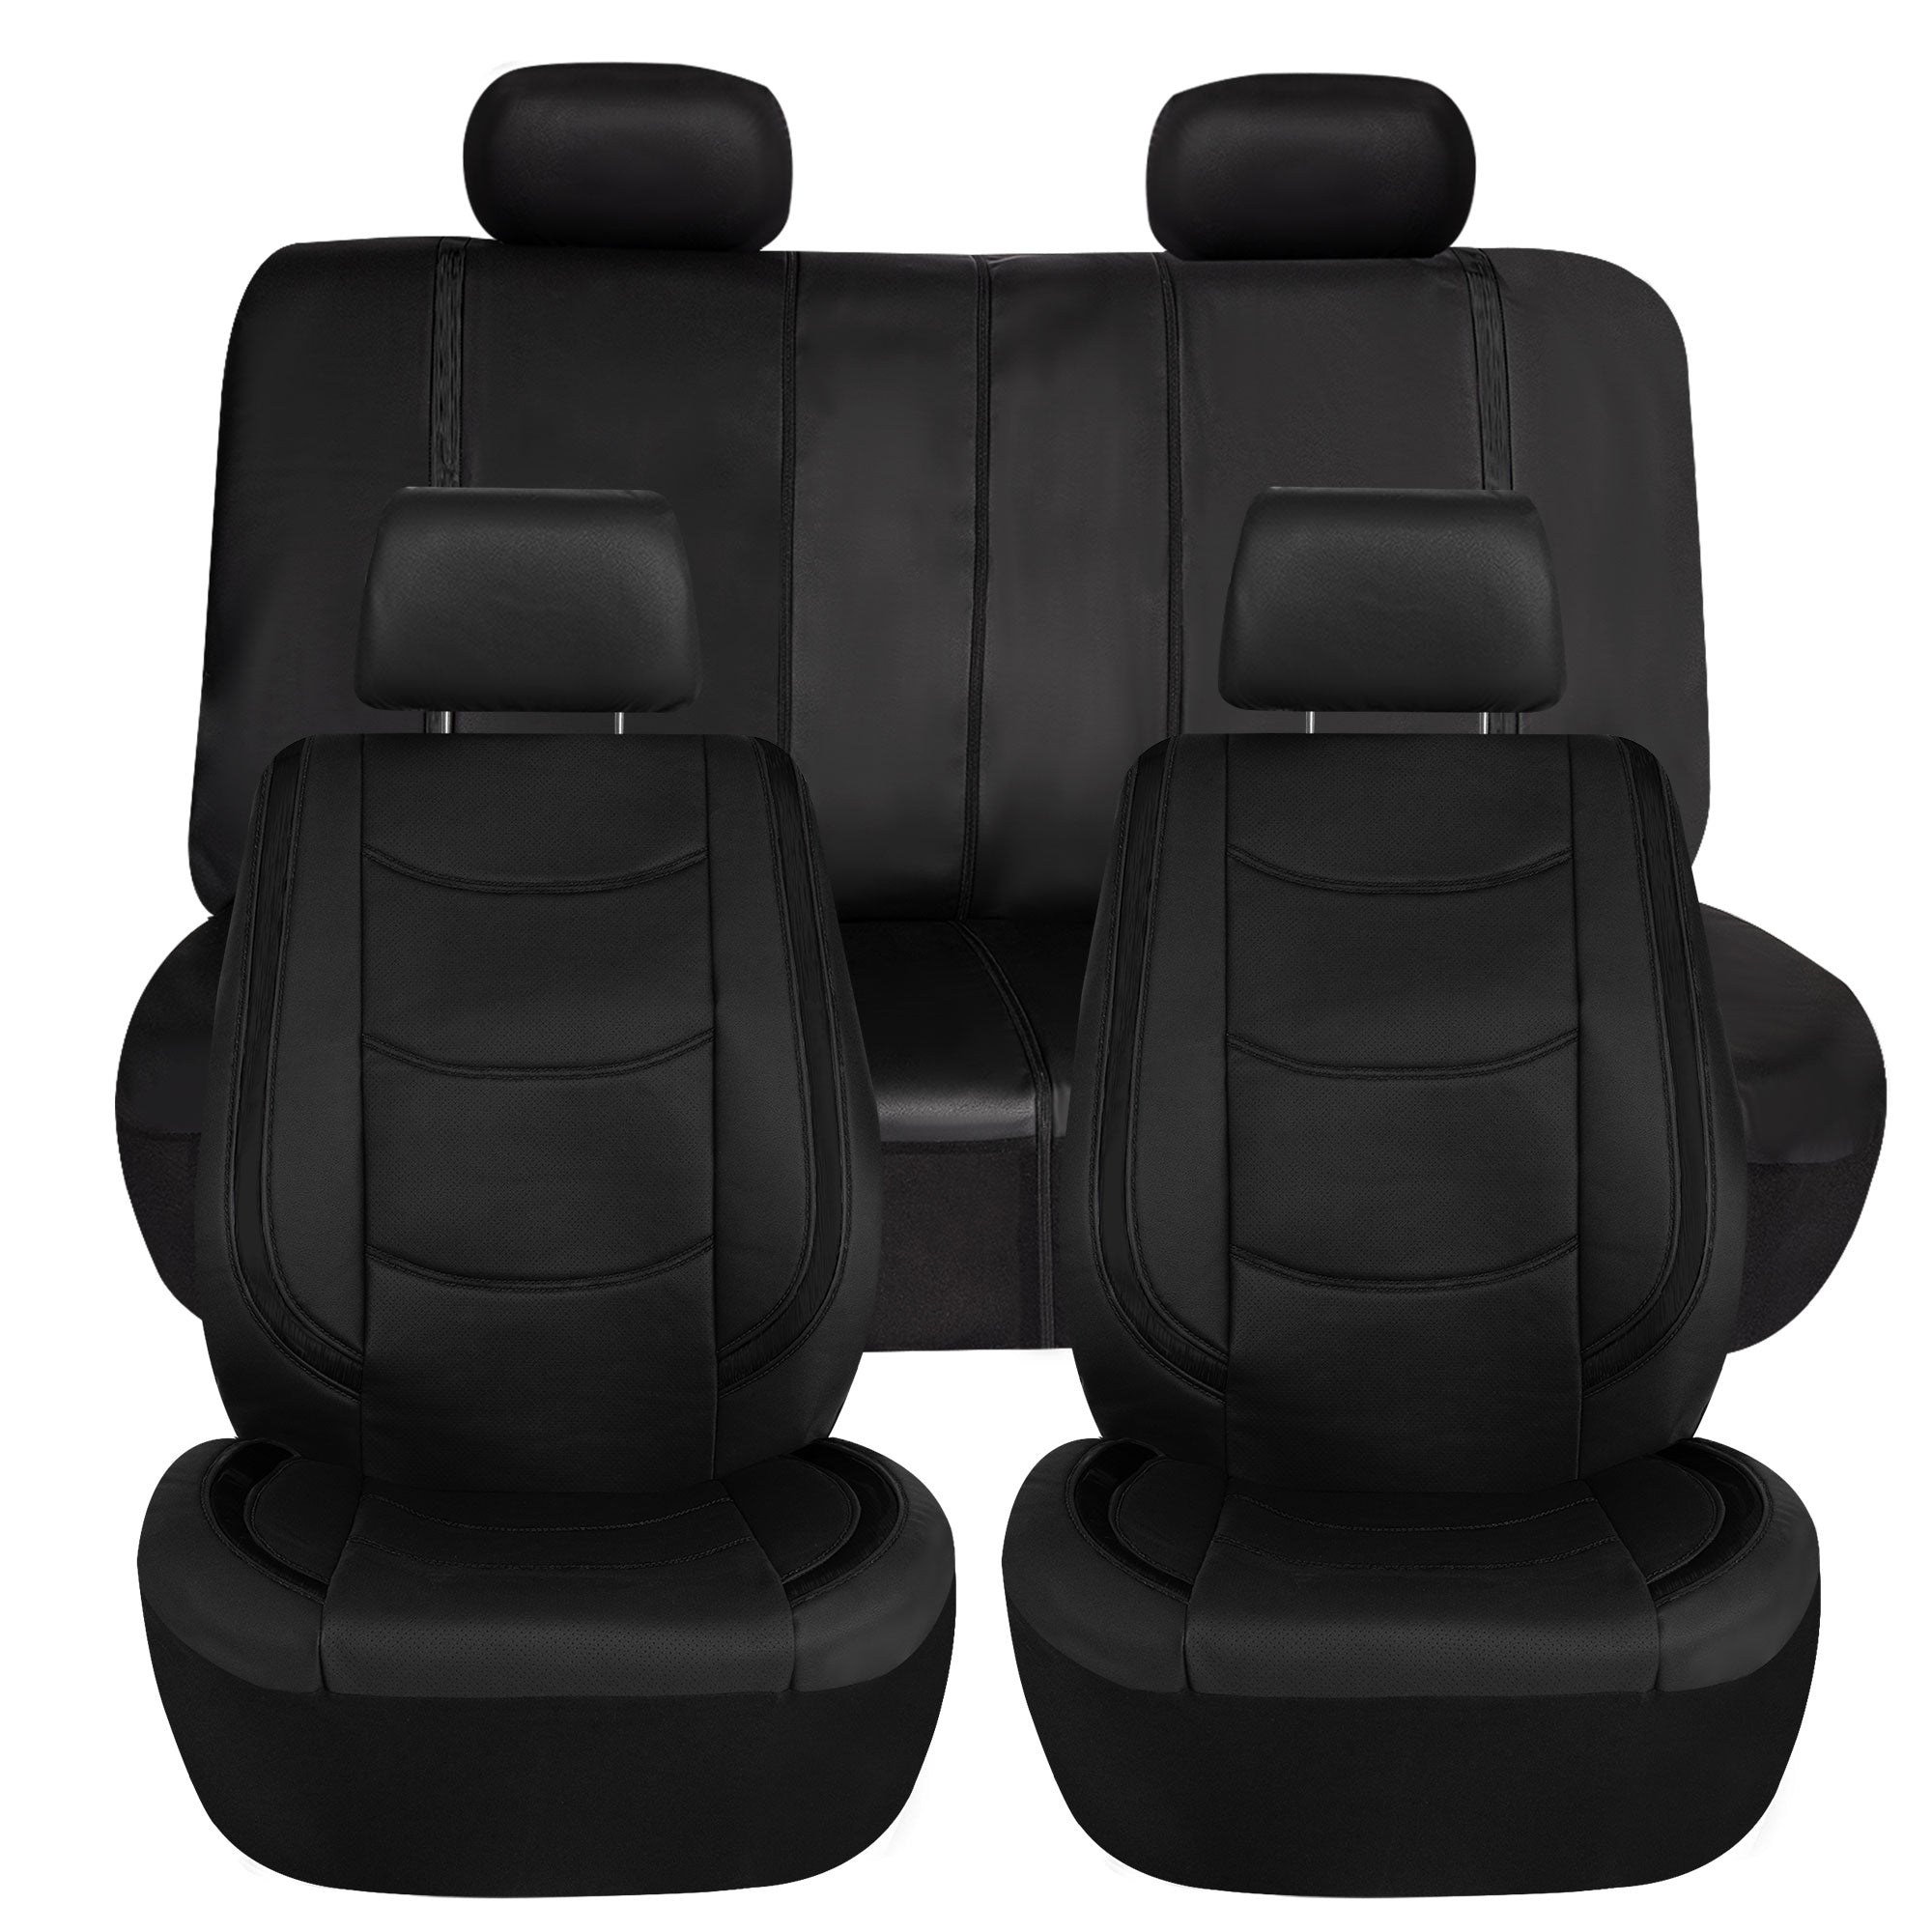 Galaxy13 Metallic Striped Deluxe Leatherette Seat Covers - Full Set Black